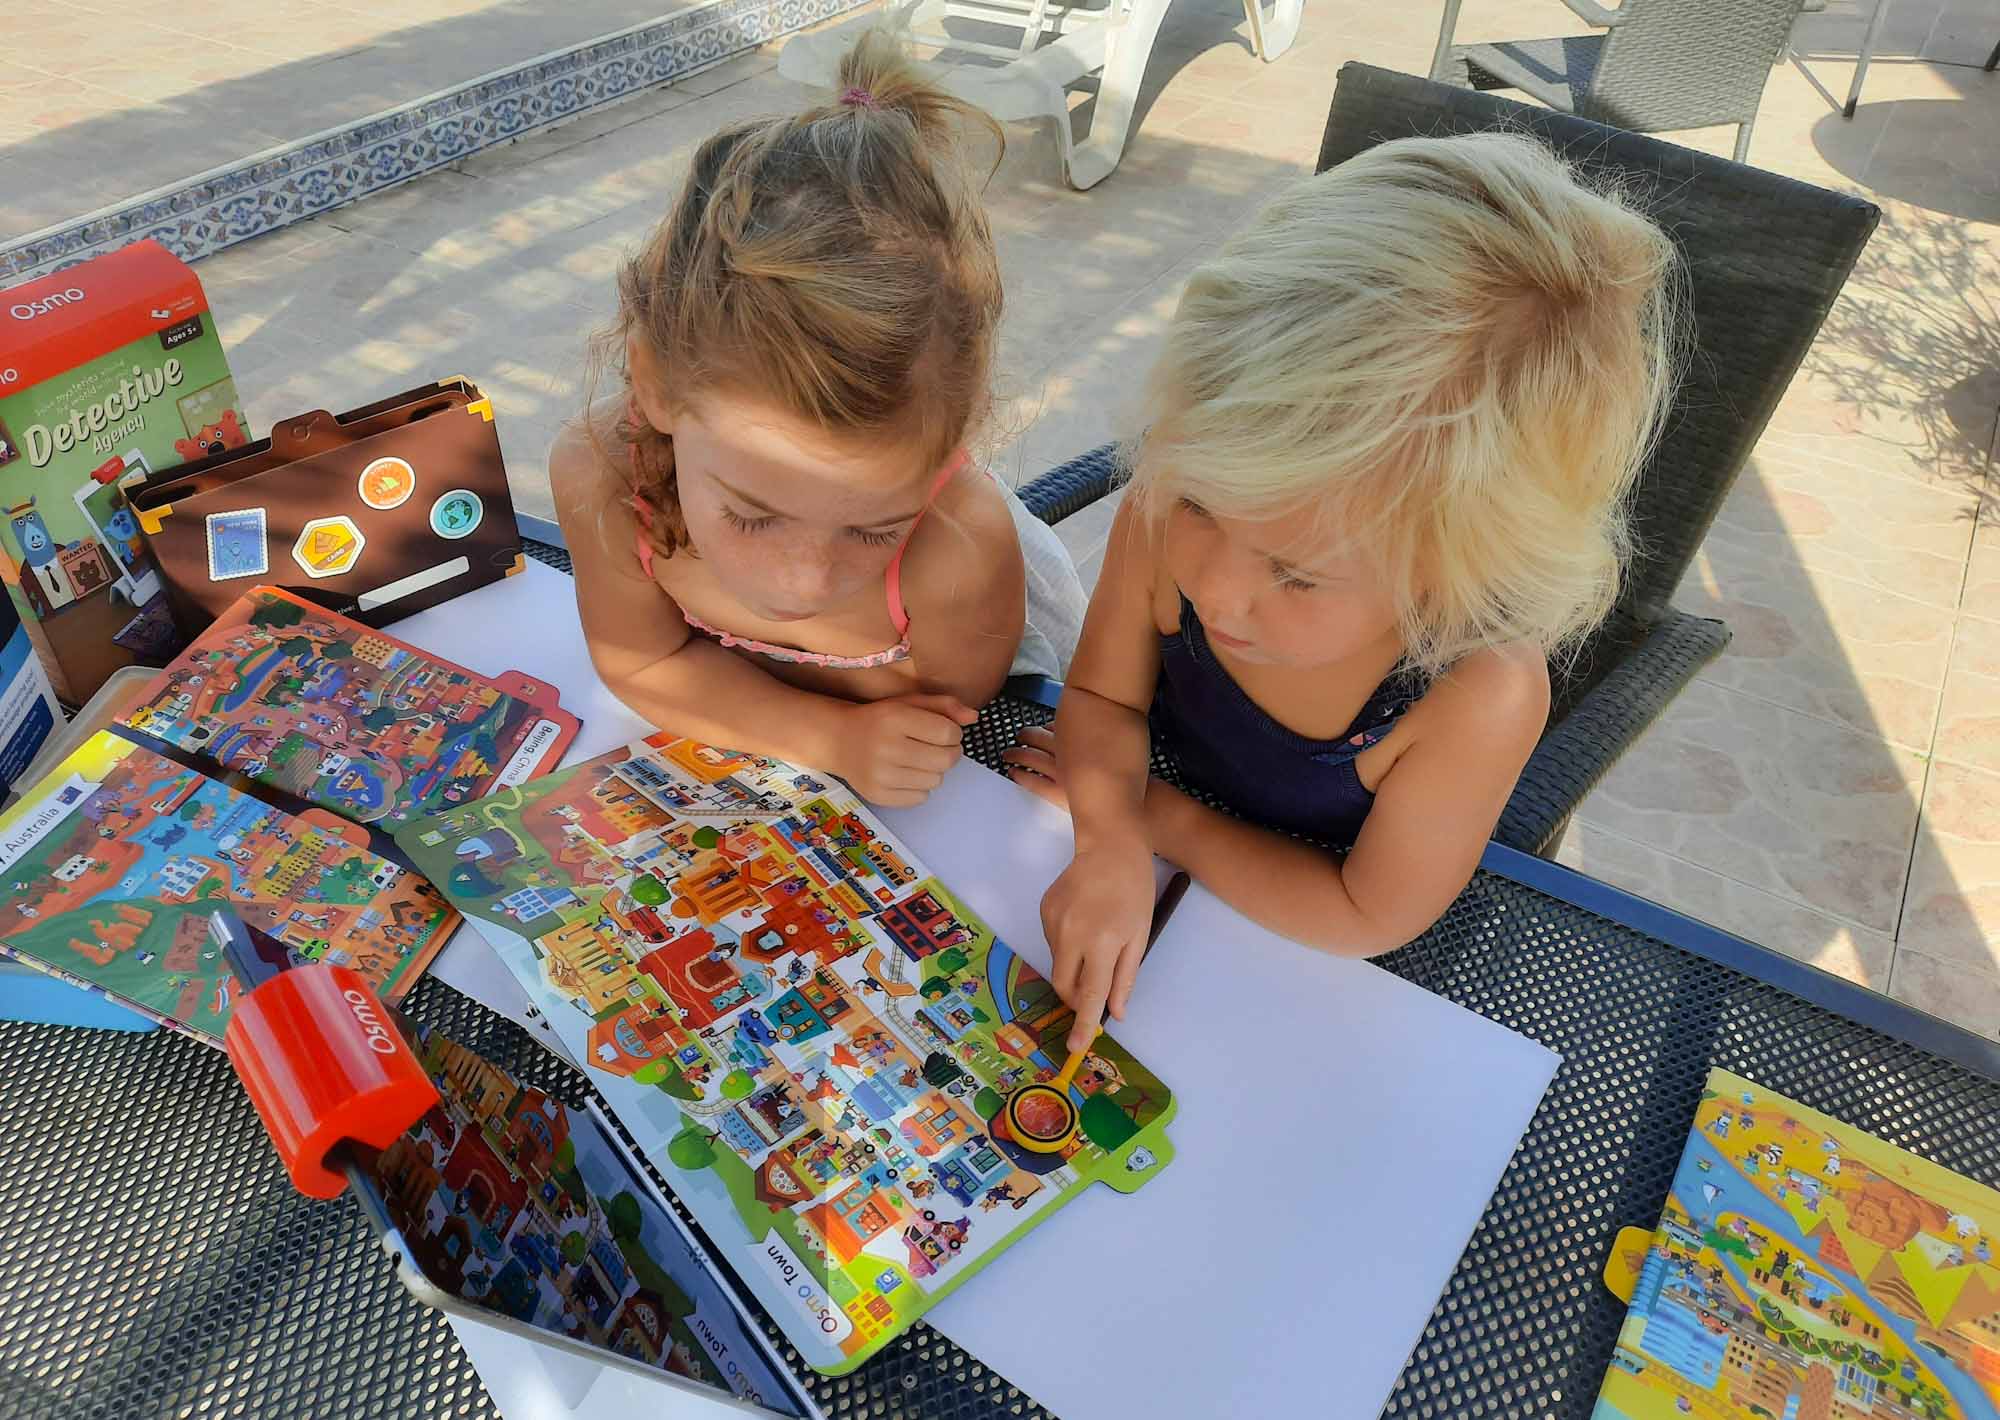 2 young girls with a toy magnifying glass, looking at a colourful cartoon map in front of an Ipod on a stand